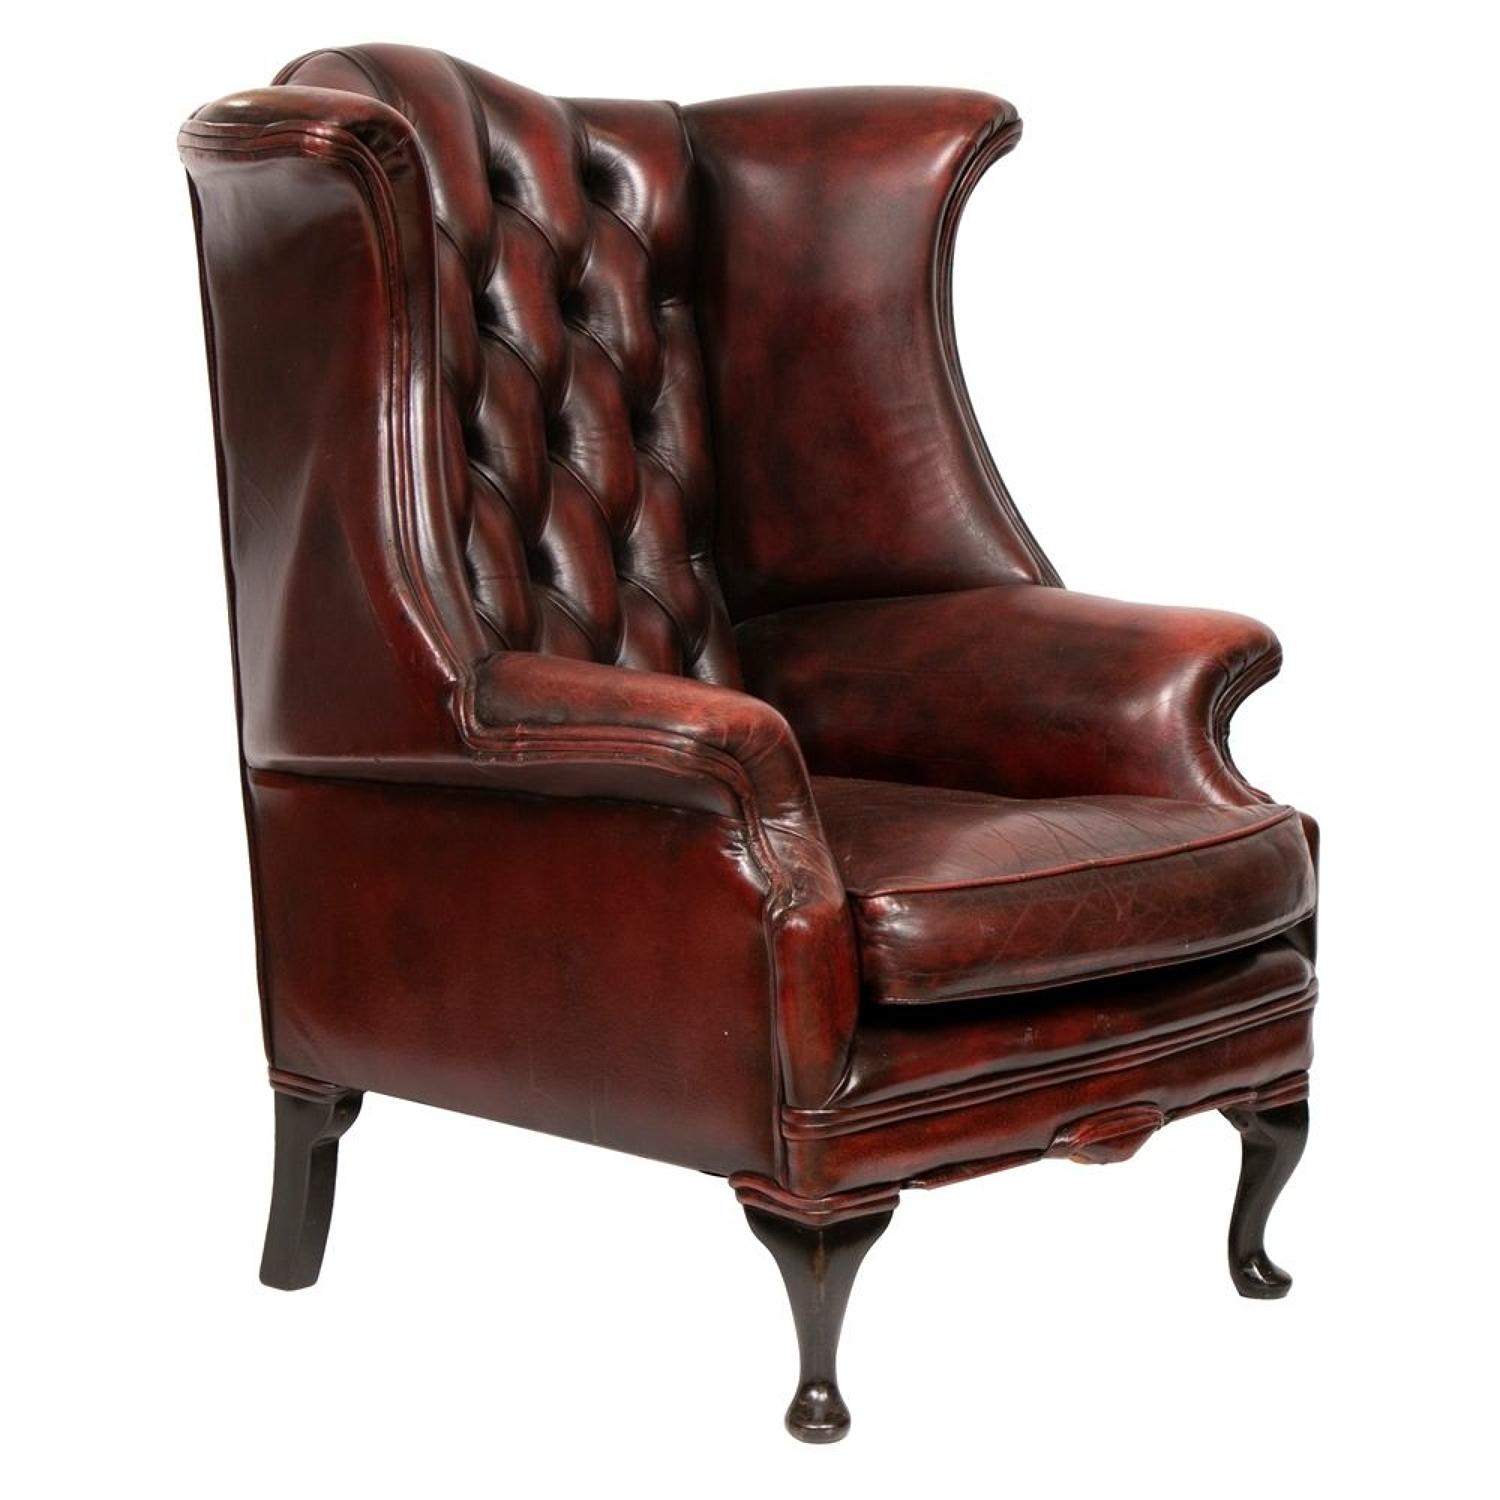 Classic Burgundy vintage Leather Wing Chair